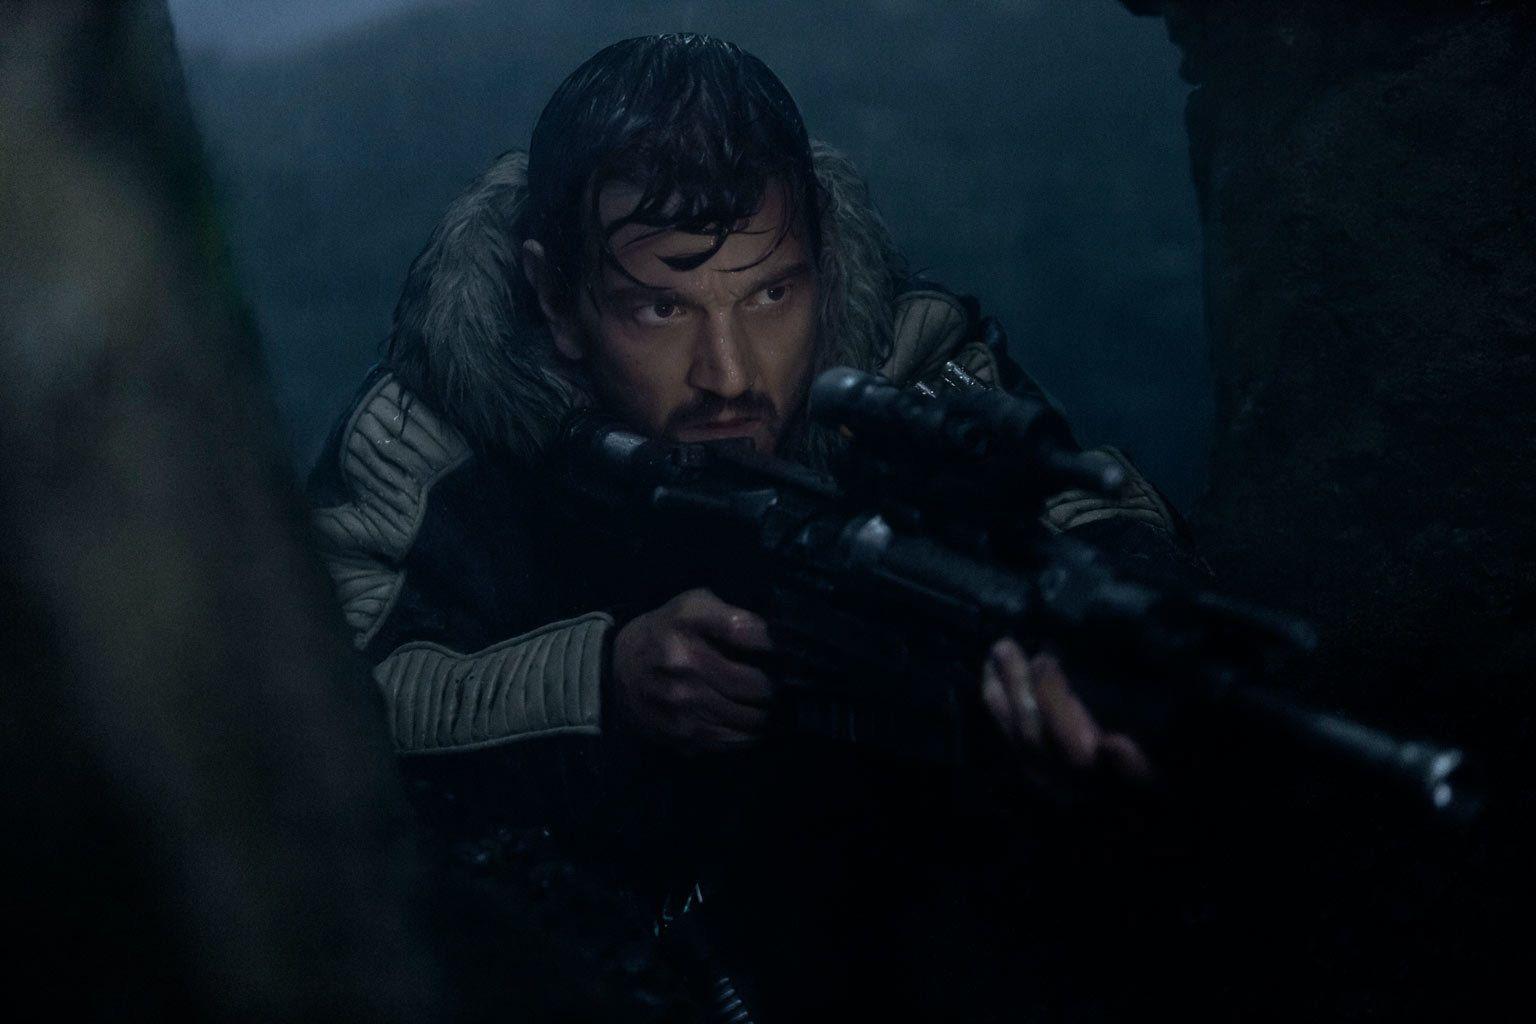 Rogue One: A Star Wars Story Photo